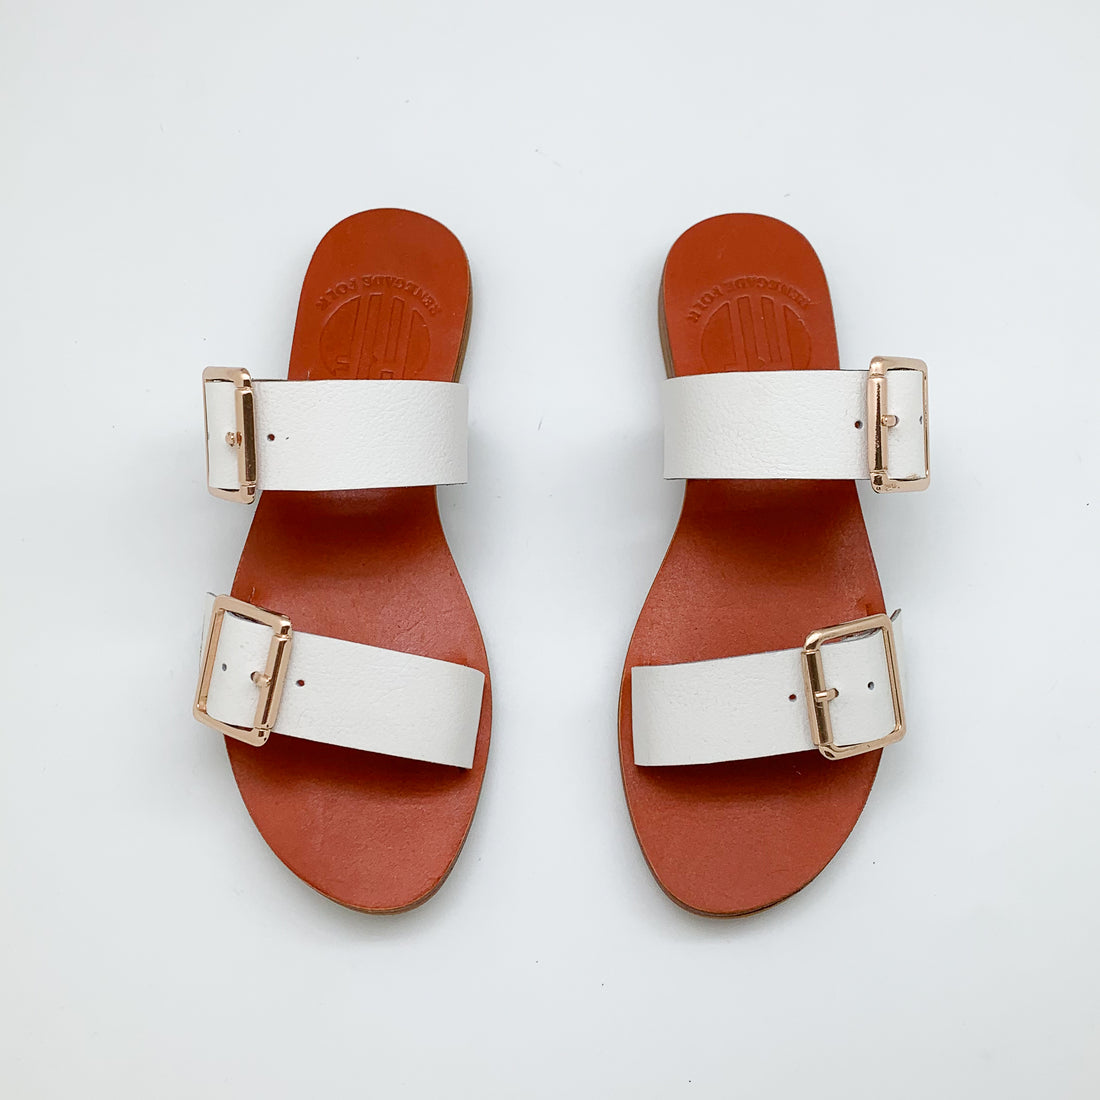 Stay Sandals